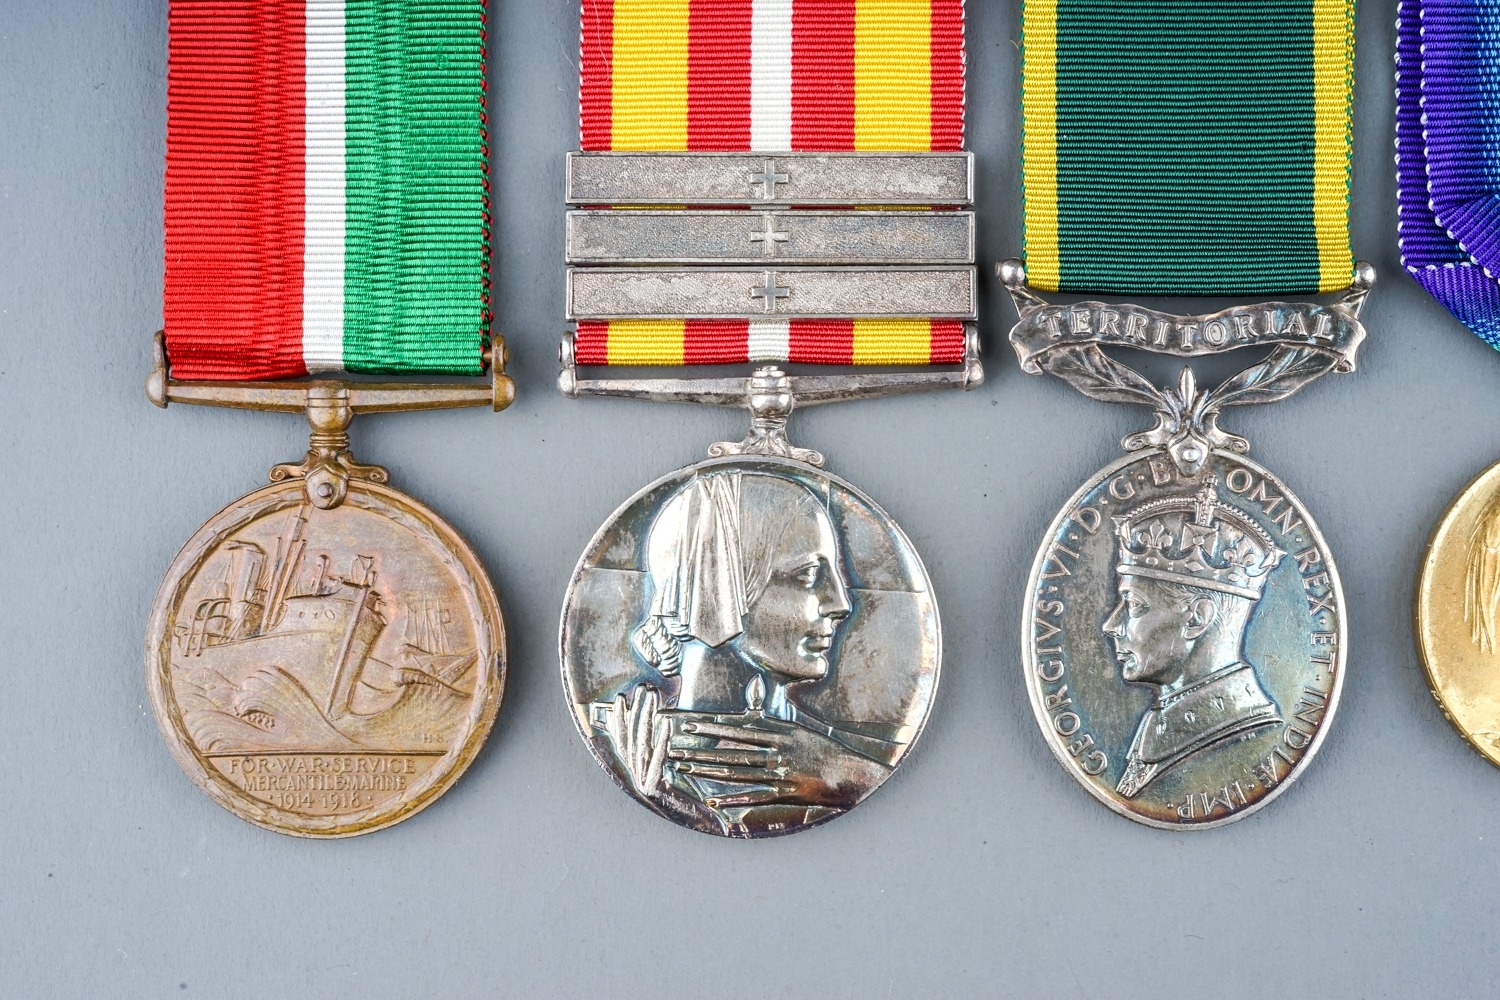 A collection of British Medals. Great War Pair - R-29124 A Cpl H H Simpkins K R Rif C. Condition - Image 4 of 12